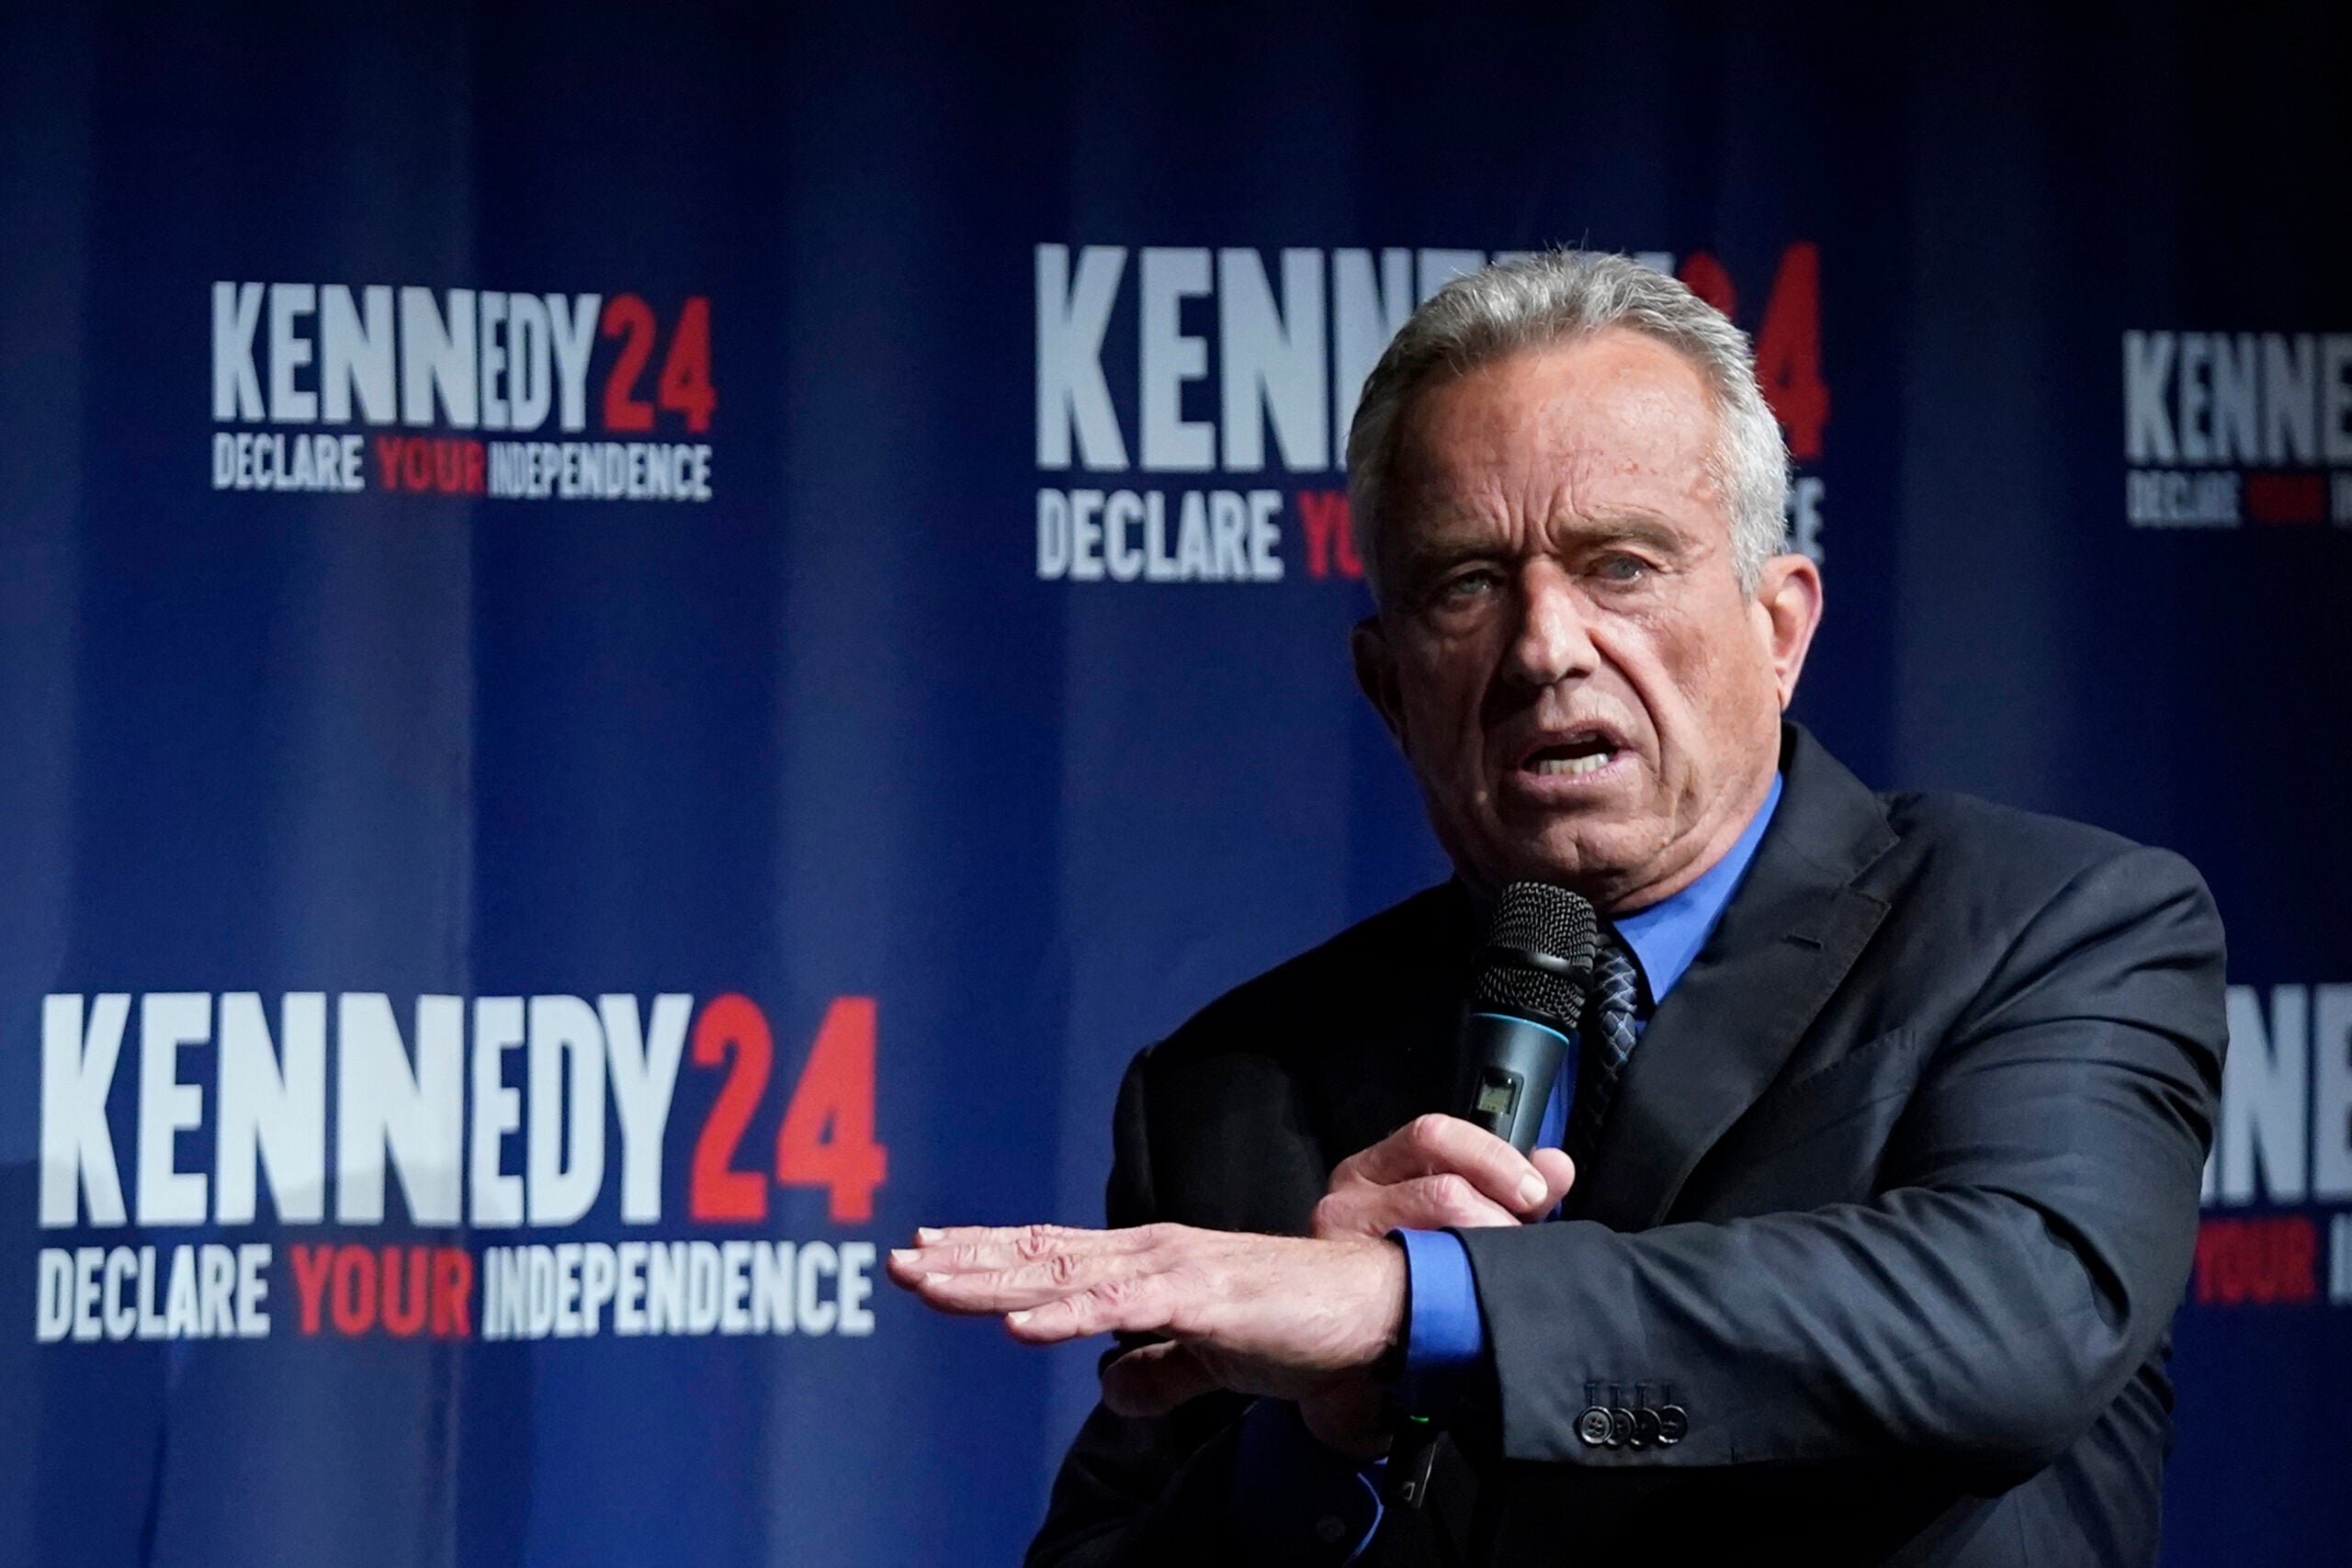 Presidential candidate Robert F. Kennedy Jr., speaks during a campaign event.